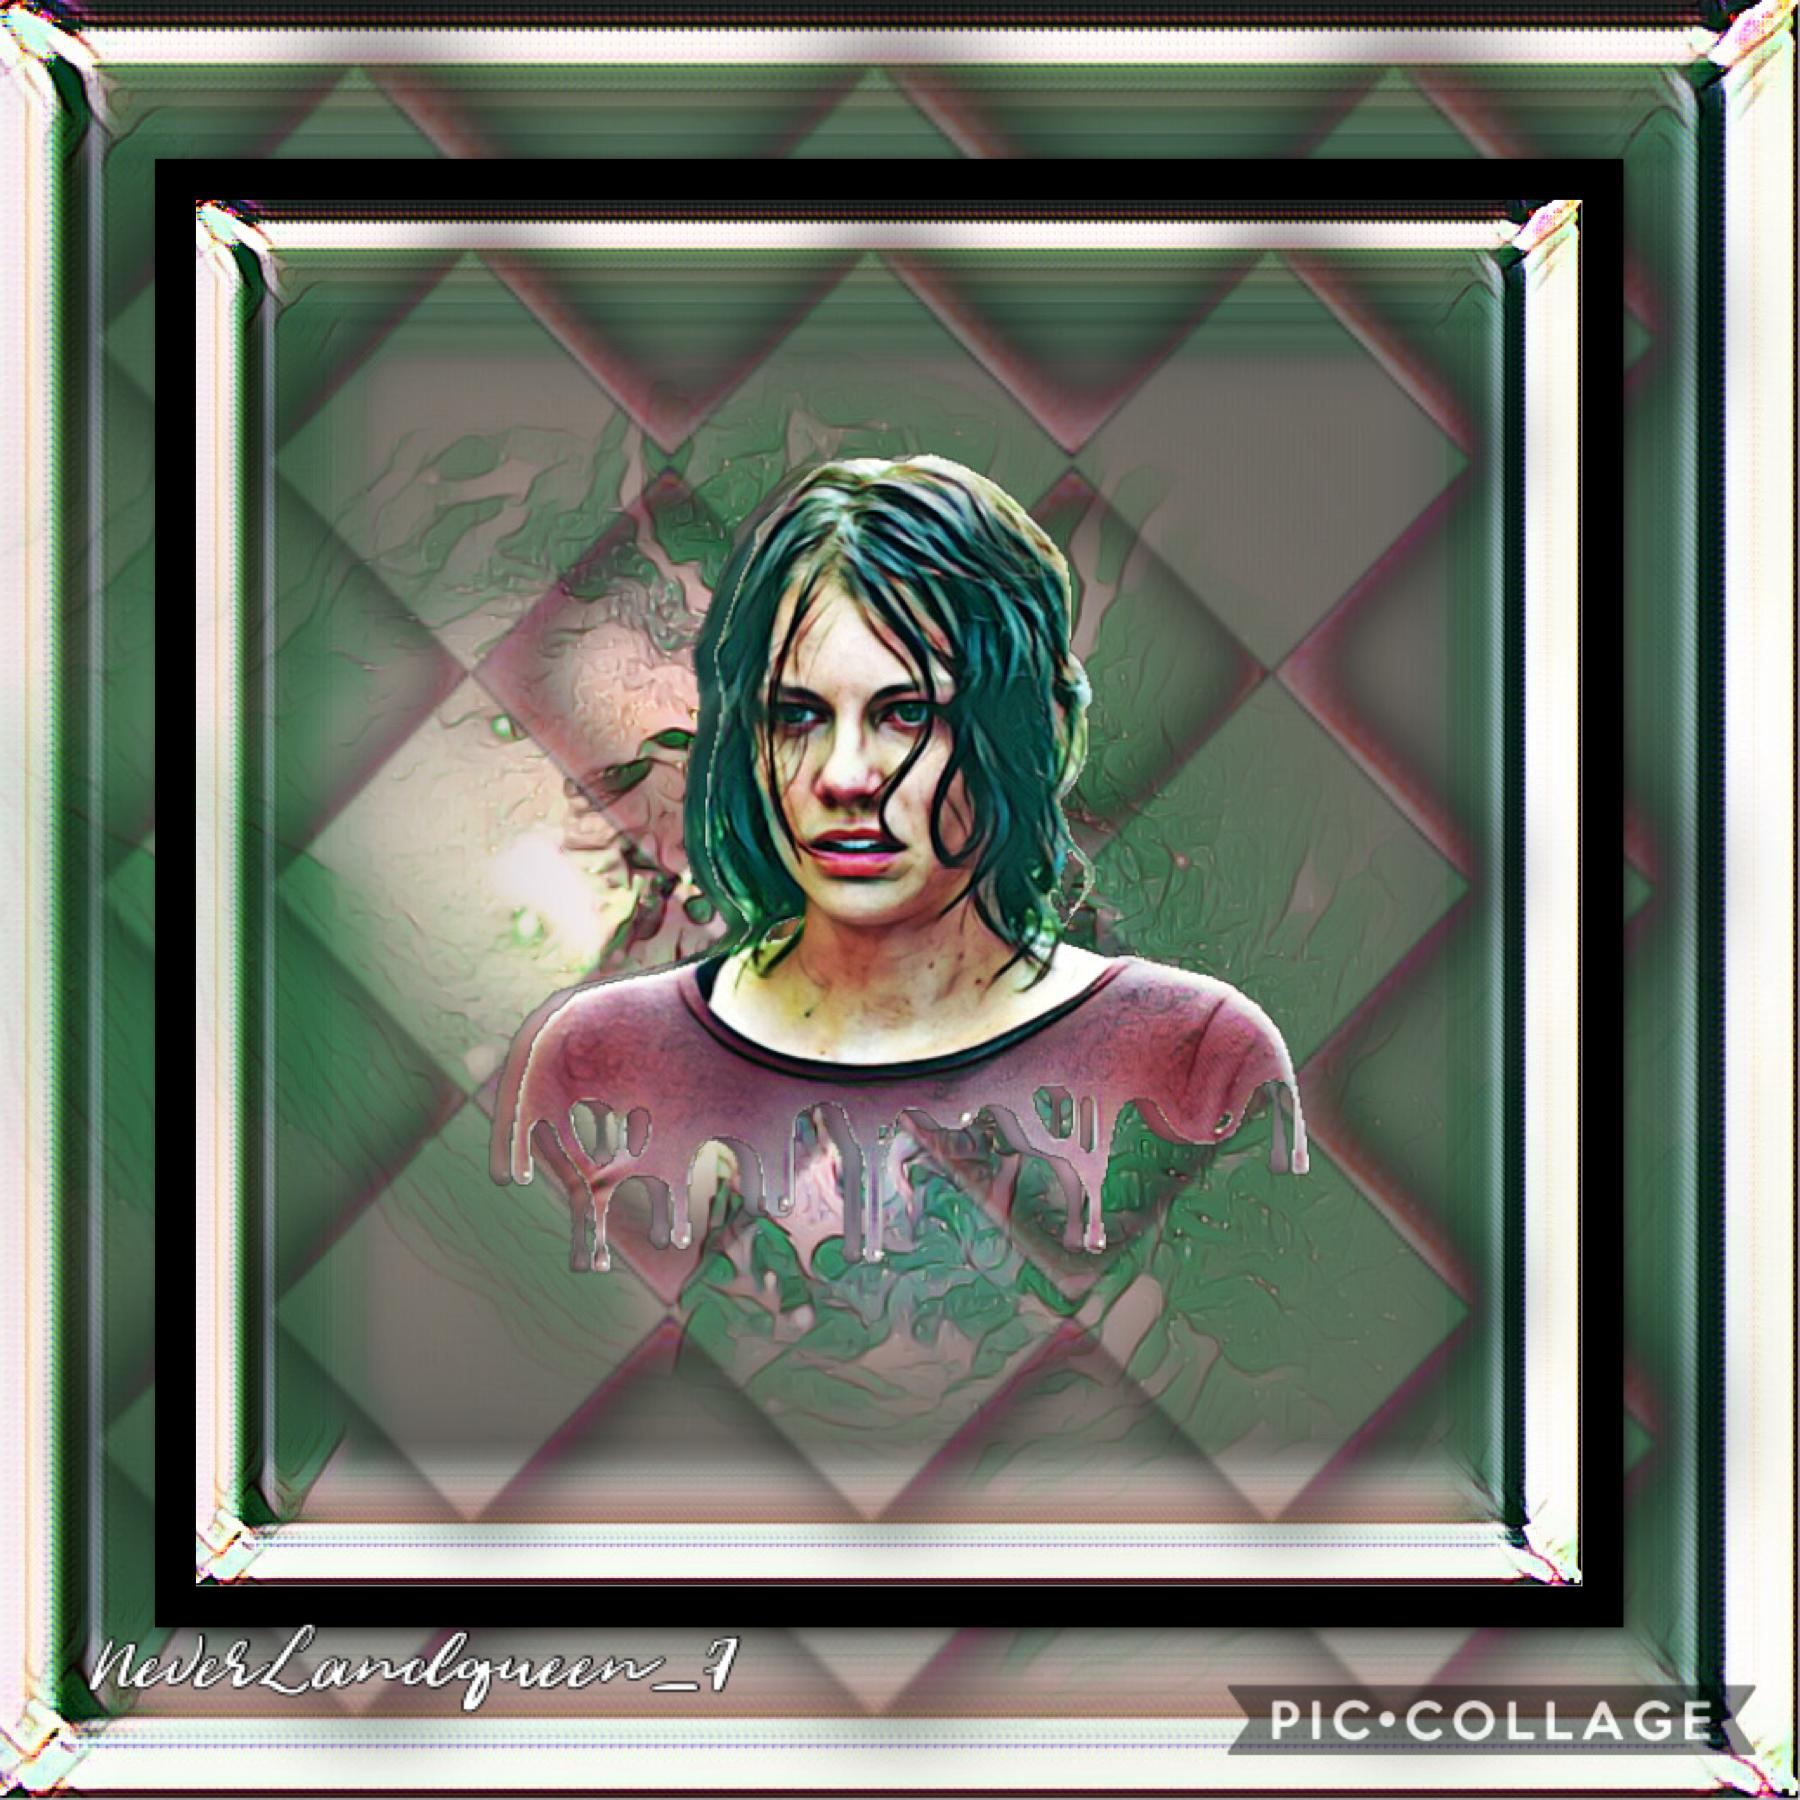 Tapp!!!

New Style #5 with Maggie Greene sorry for being inactive....

Rate/10💚💗